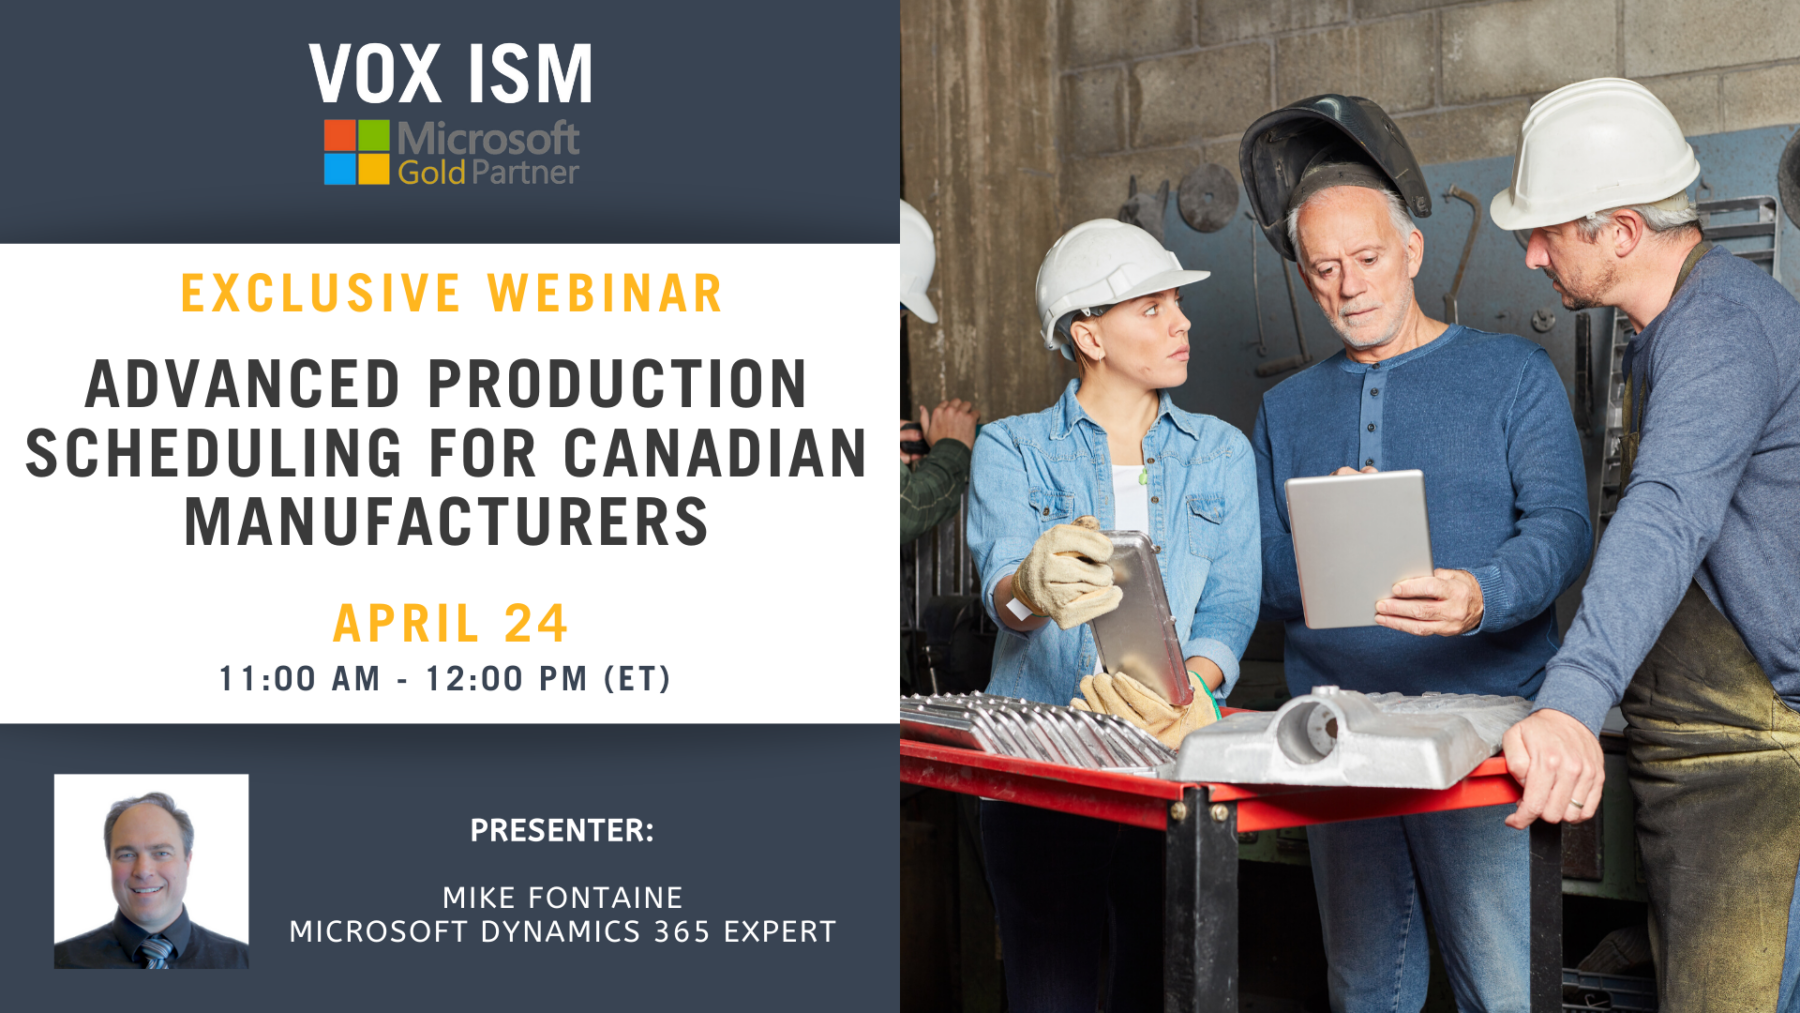 Advanced Production Scheduling for Canadian Manufacturers - April 24 - Webinar_VOX ISM